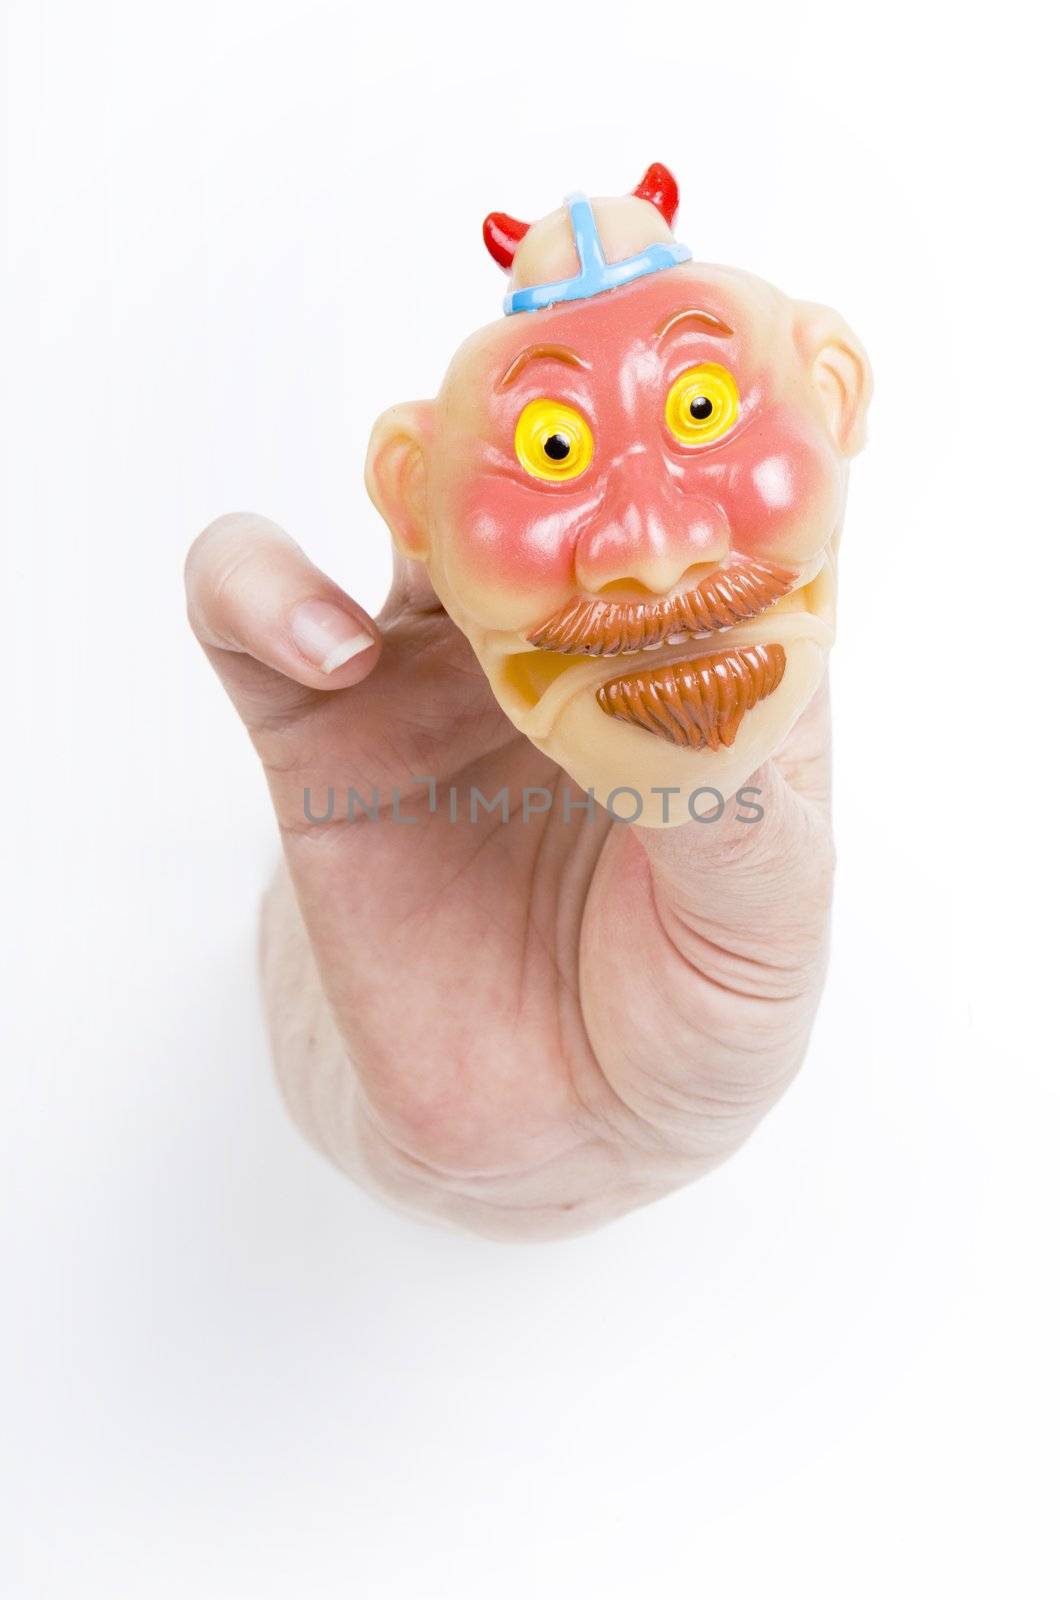 Funny squishy face held by fingertips